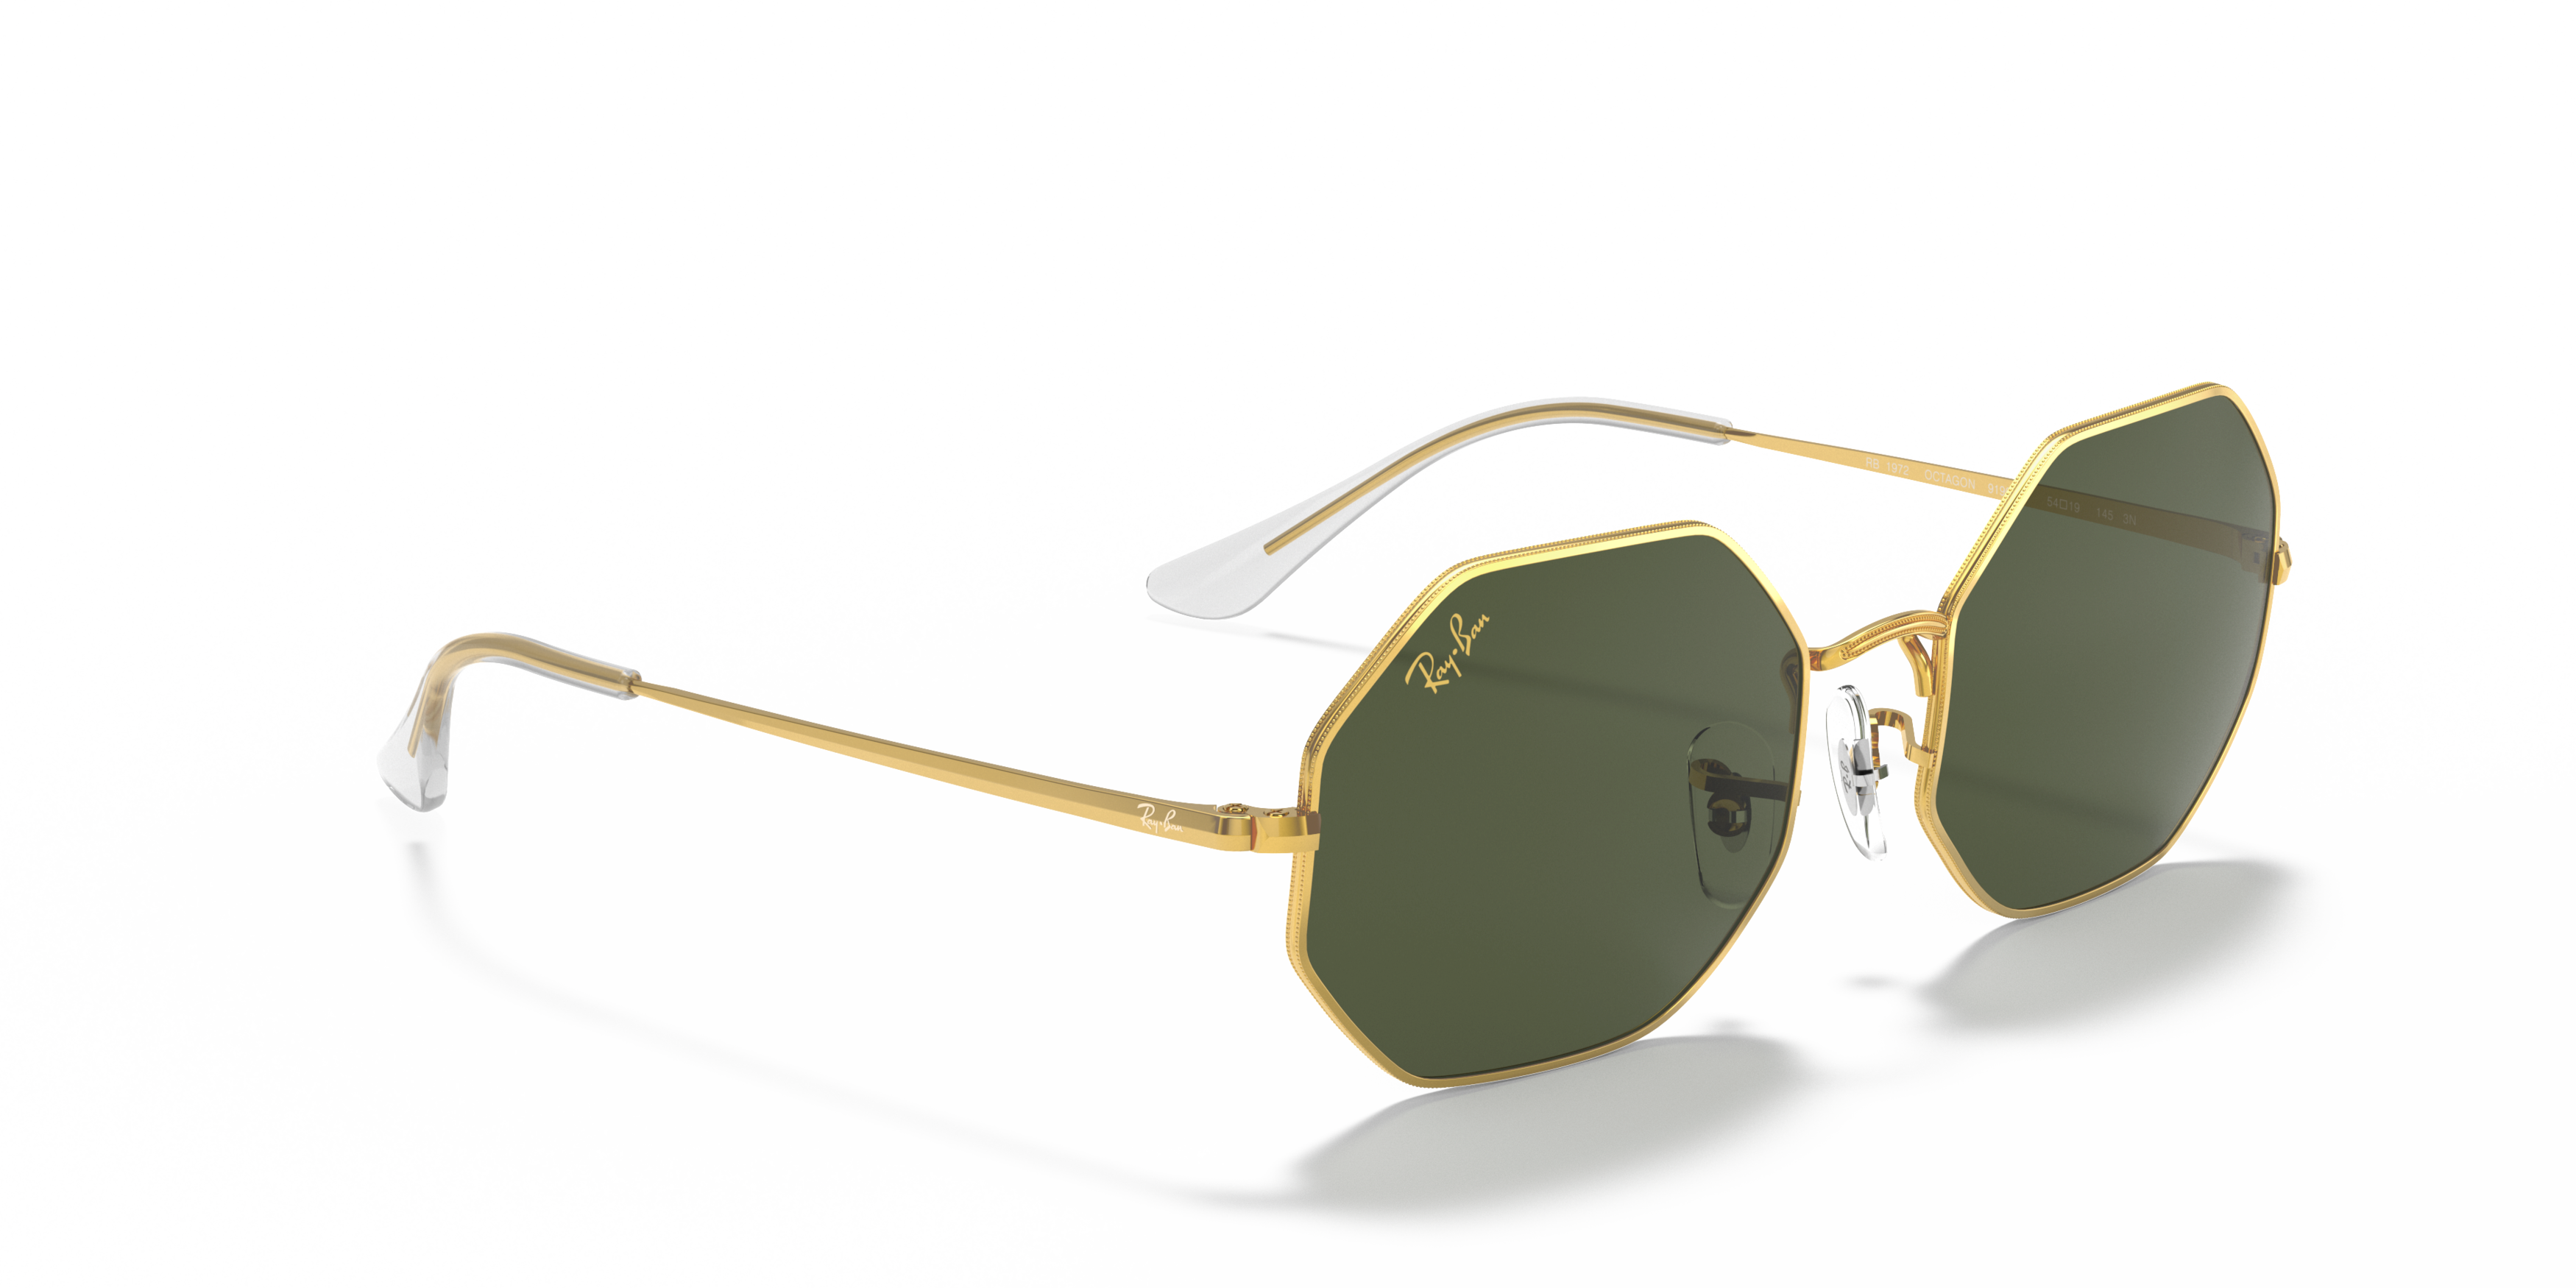 Angle_Right01 Ray-Ban Octagon 1972 RB1972 919631 Groen / Goud